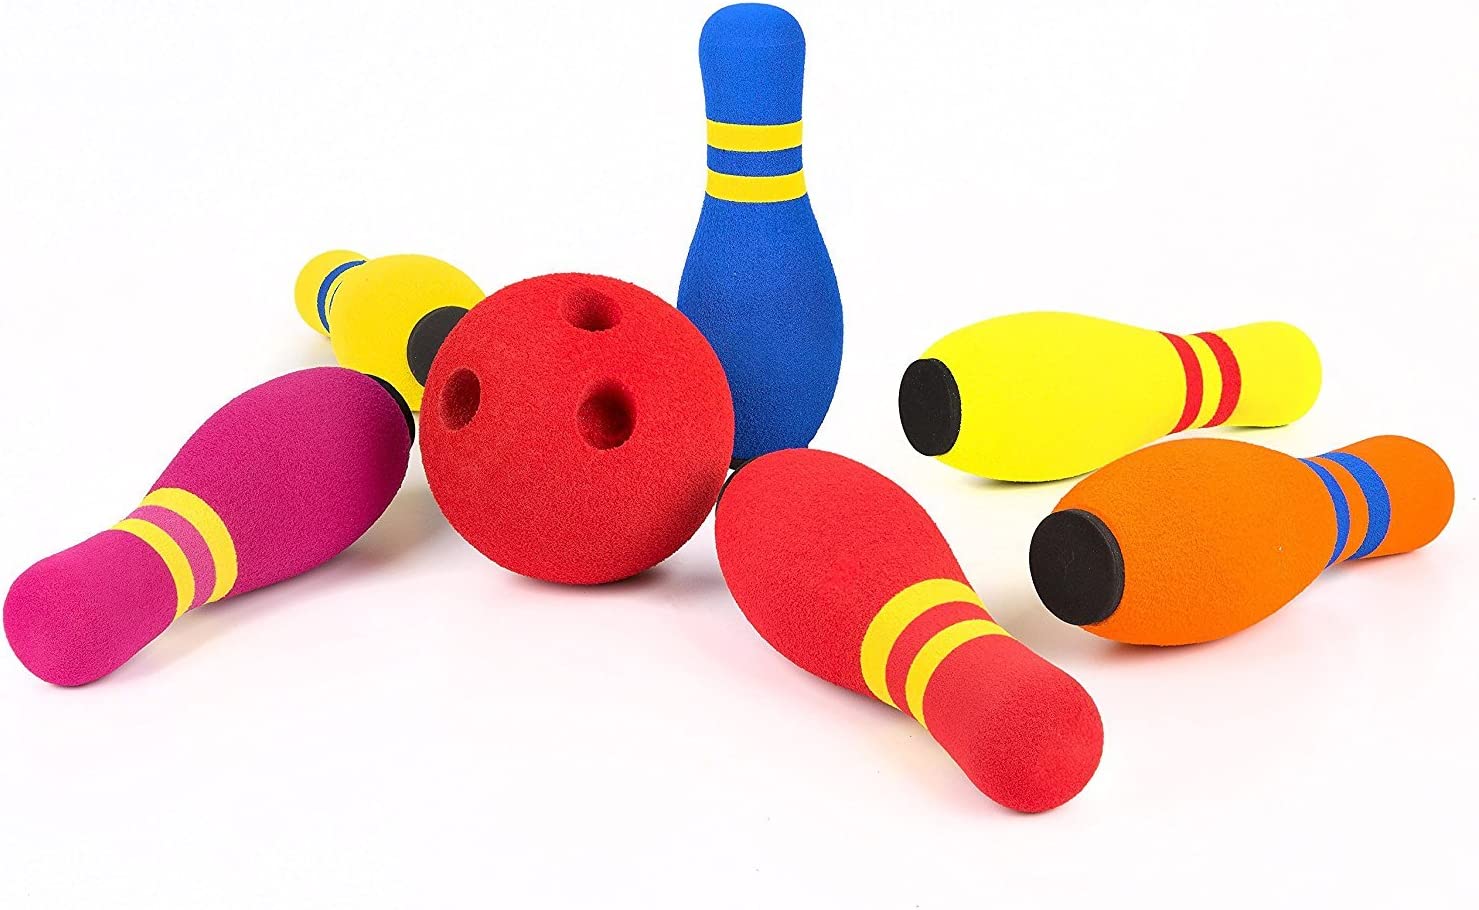 Bowling games for children